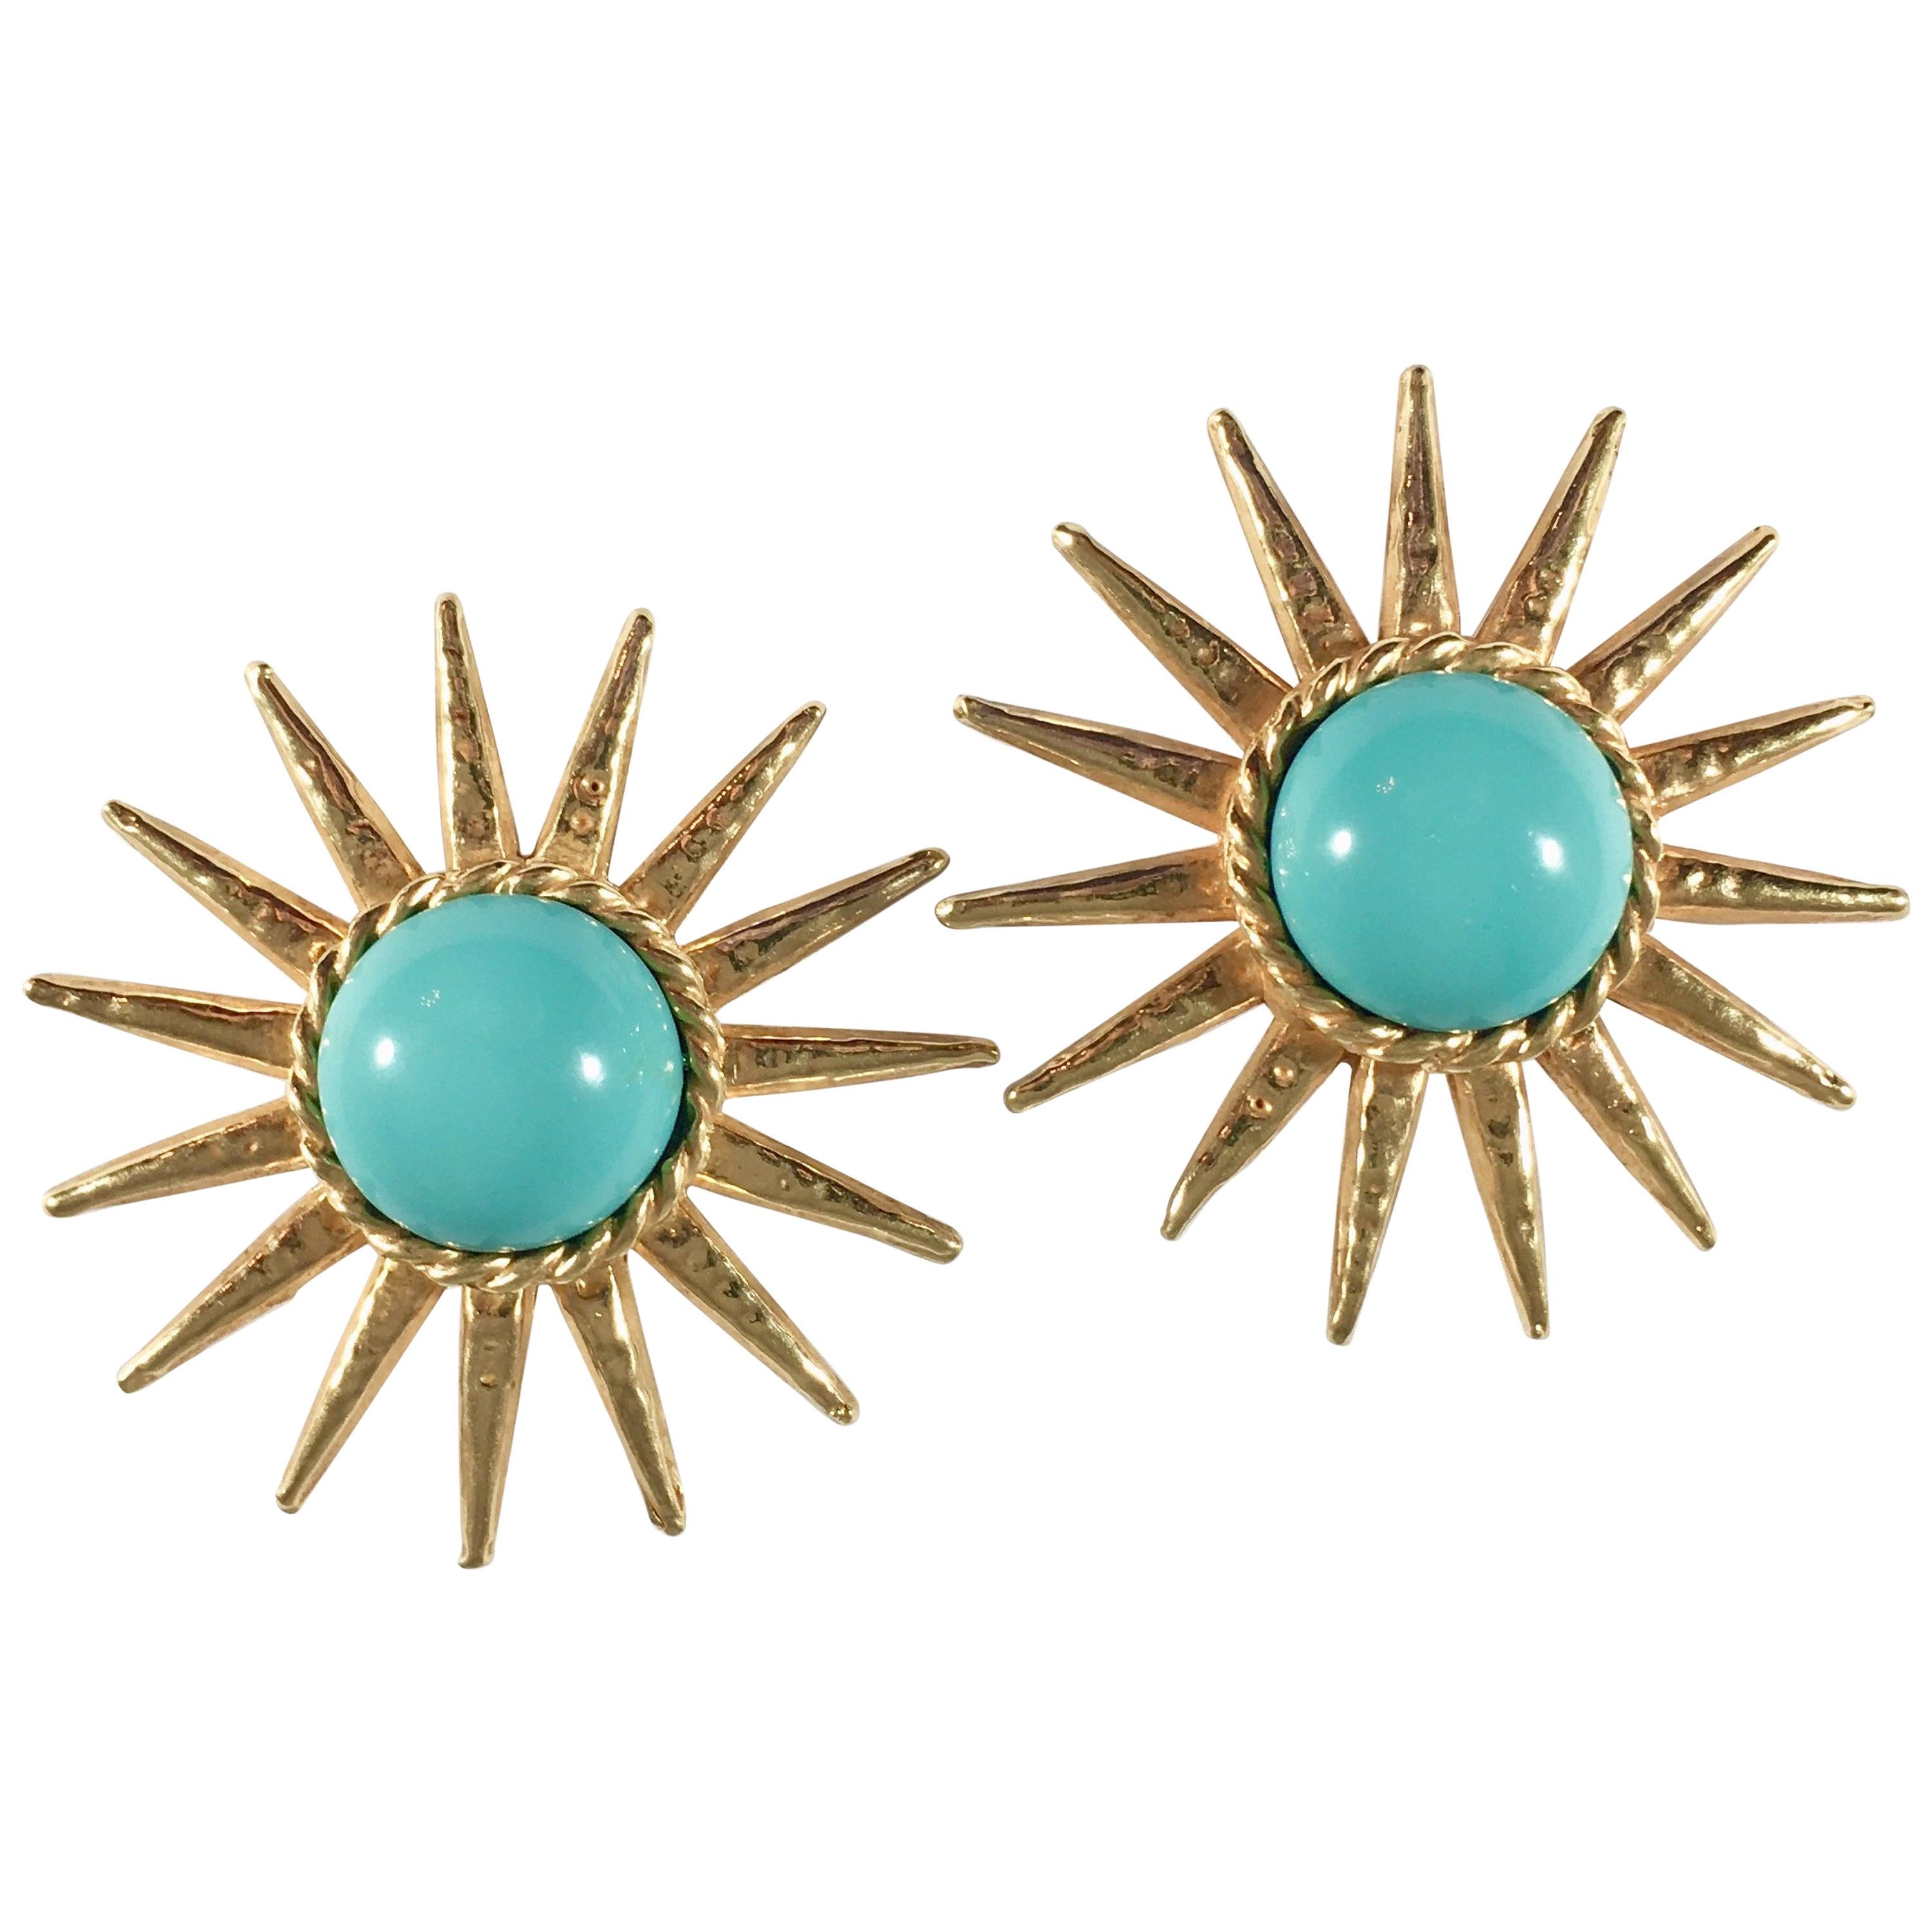 Phillipe Ferrandis Star Earrings with Turquoise Centers, 1990s For Sale